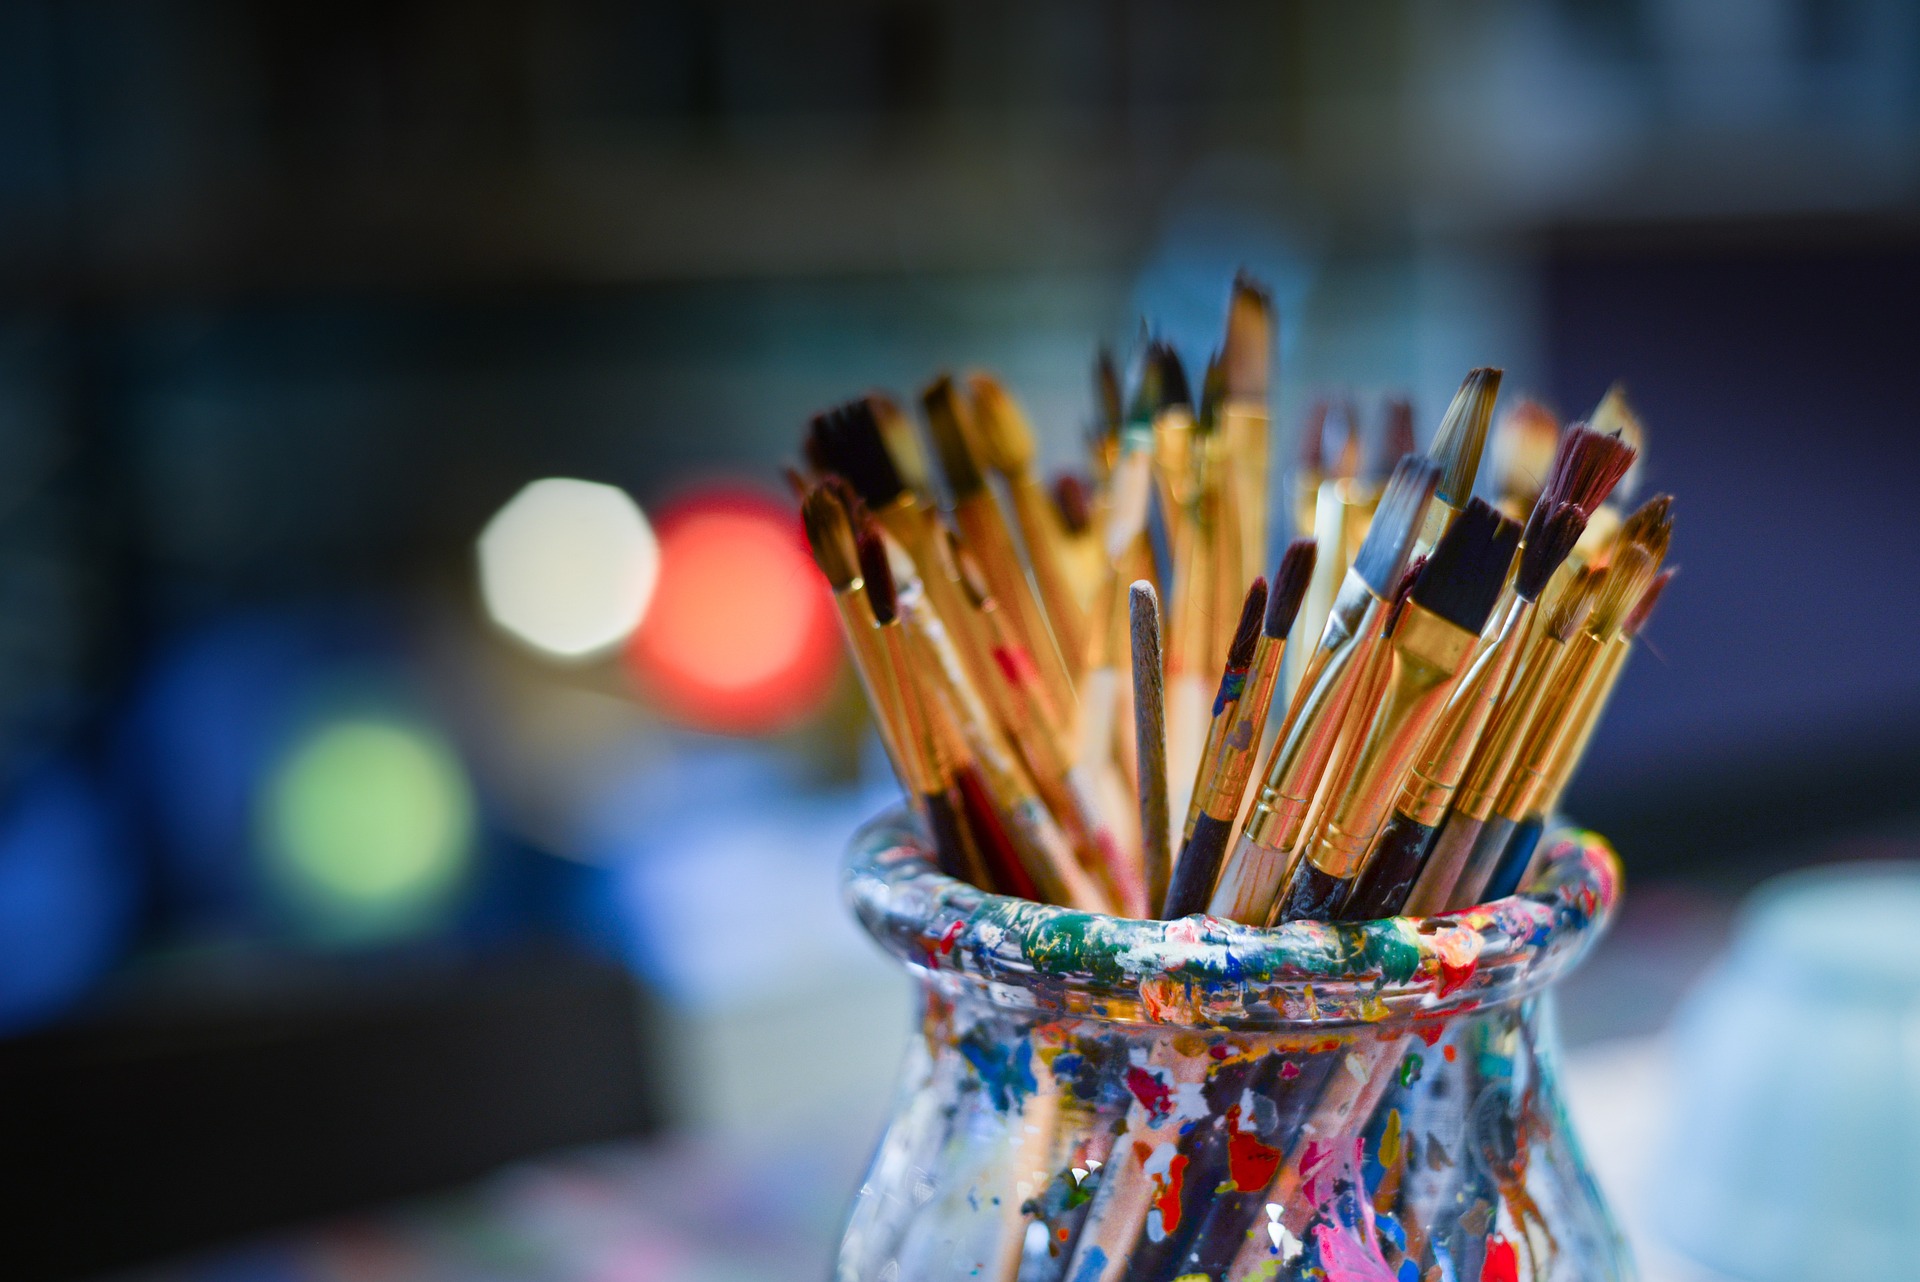 A stock photo of a glass with paint brushes in it and soft colorful lighting